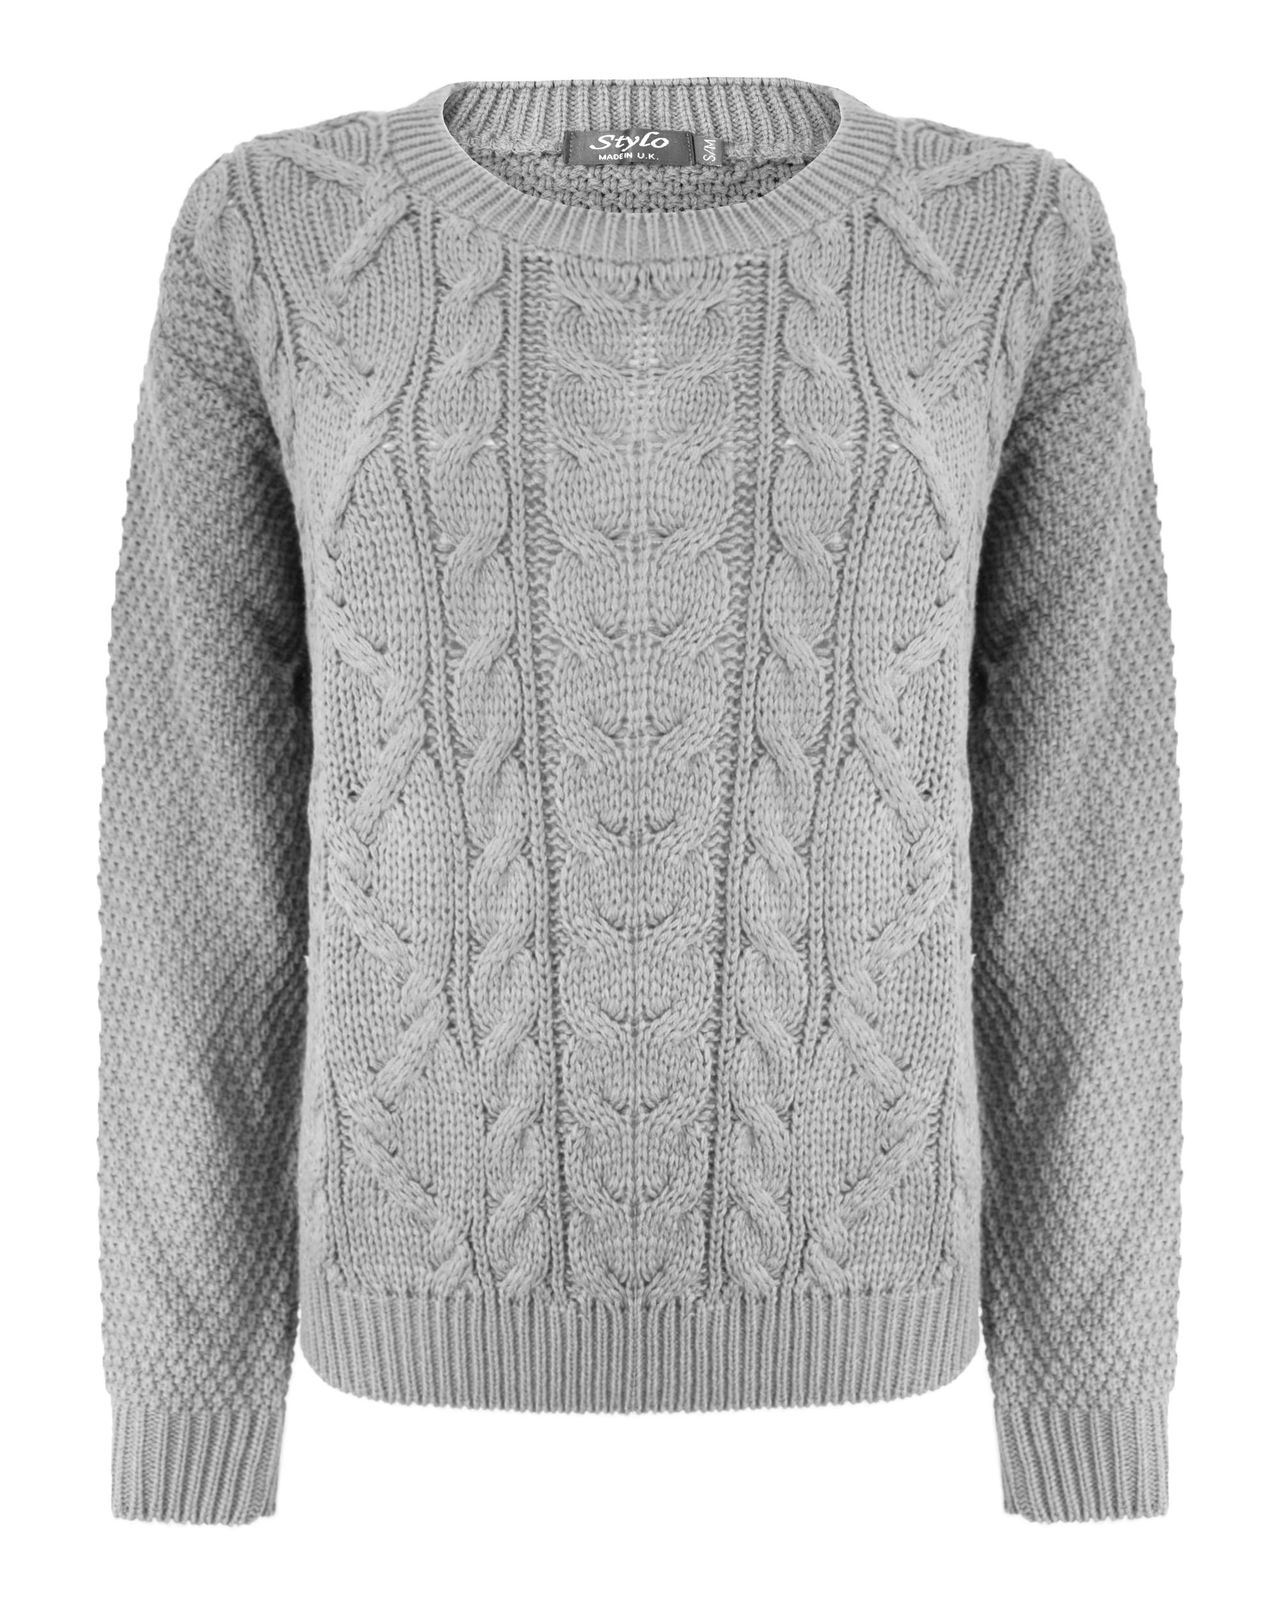 Womens Knit Sweaters – fashionable cuts and designs